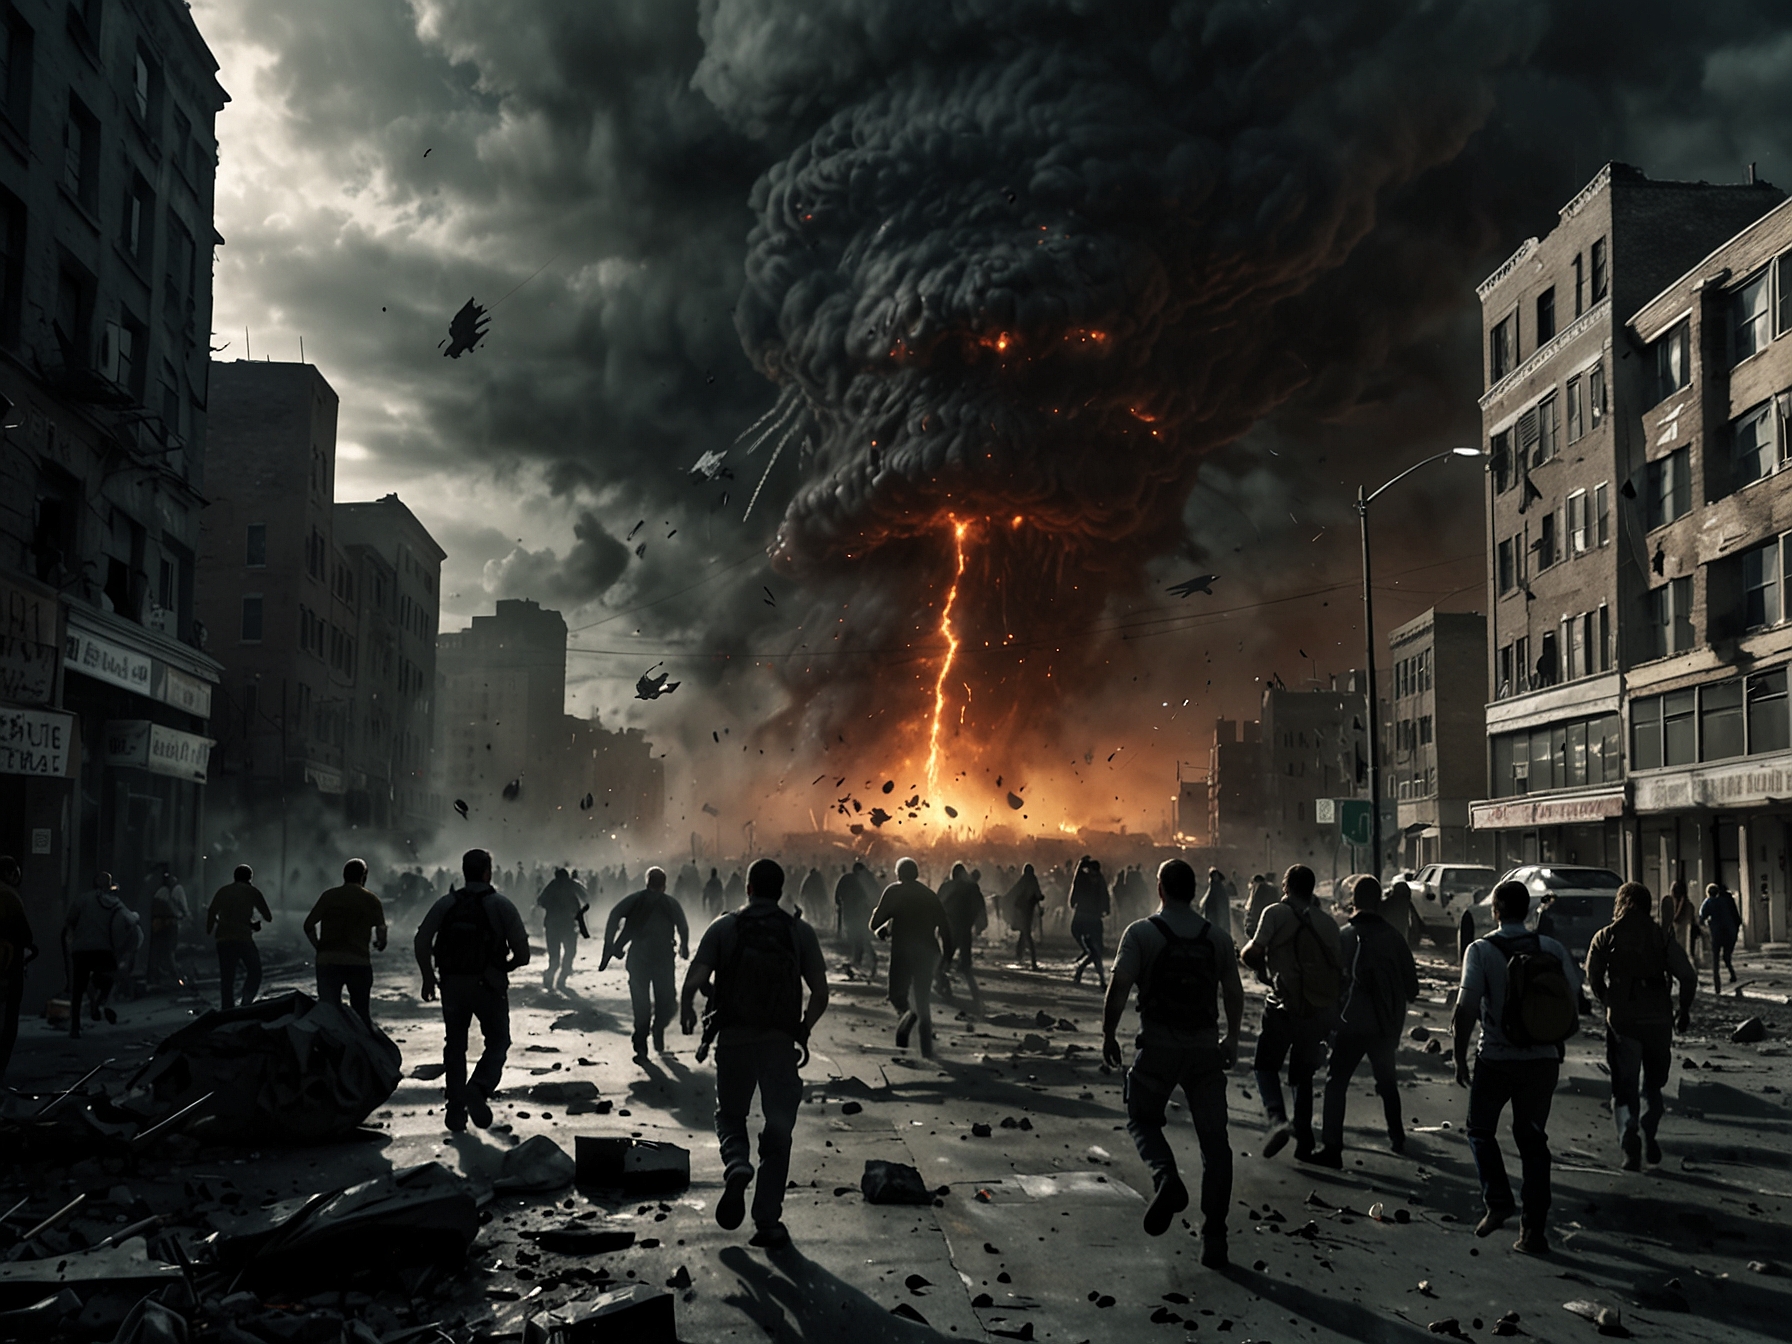 A tension-filled scene showing the initial alien invasion, with panicked humans running for cover amidst chaos in a crumbling cityscape, highlights the visceral horror and immediate threat.